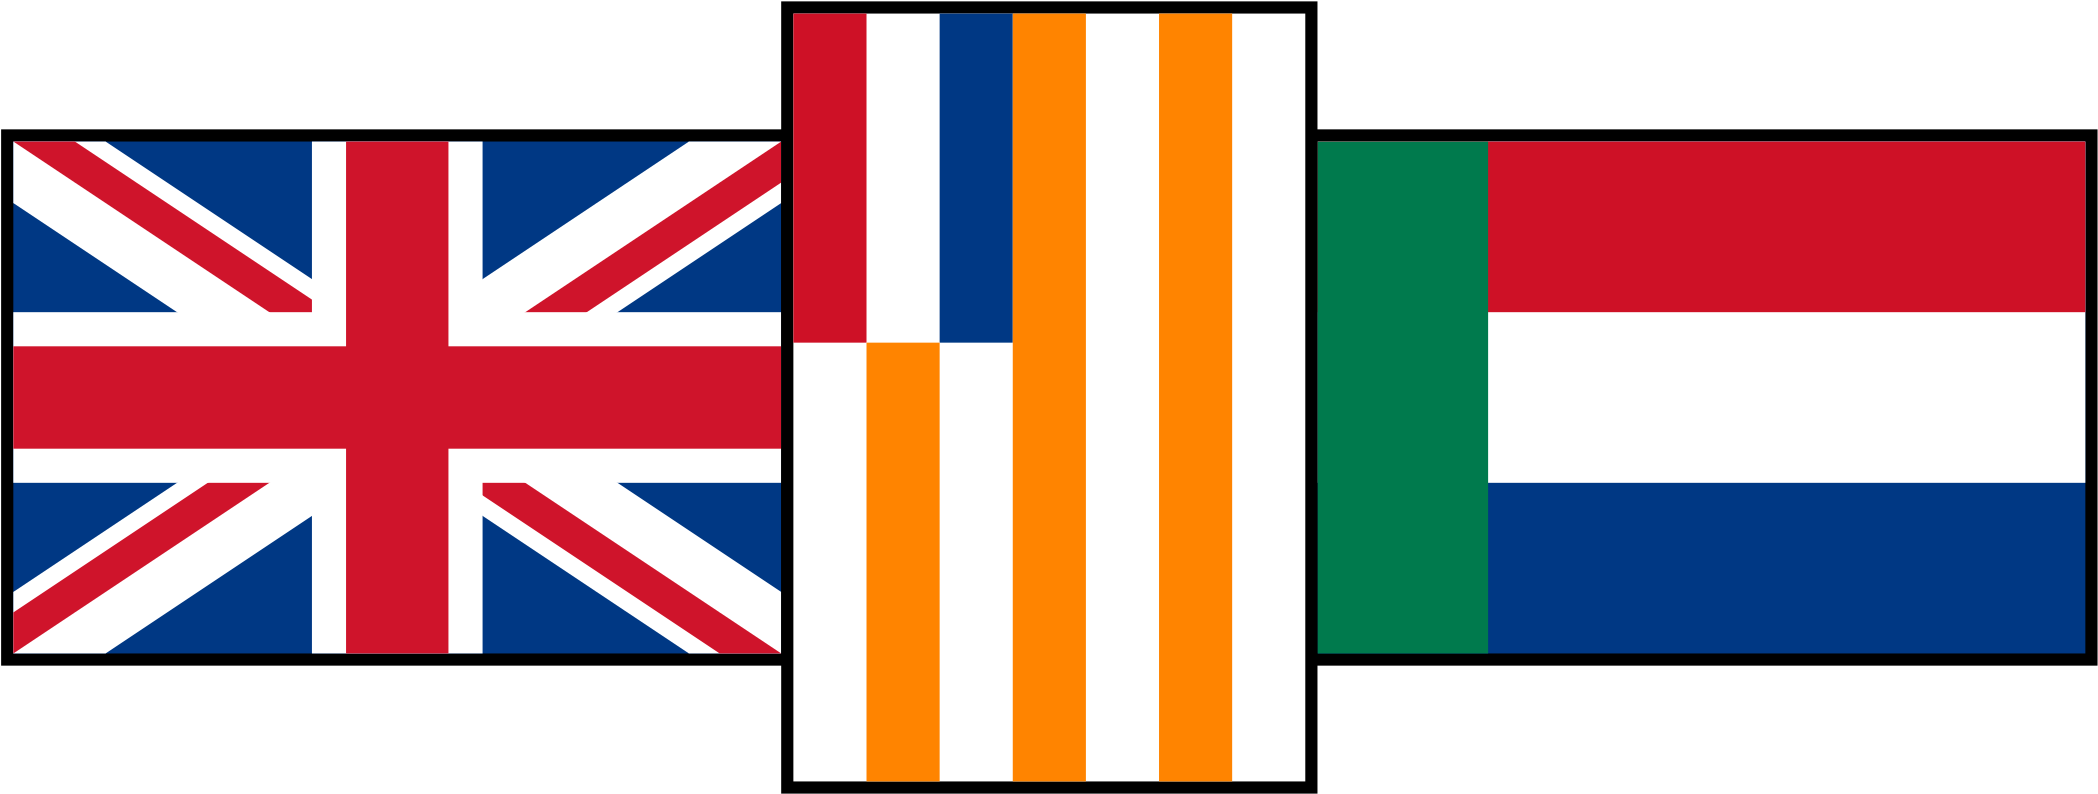 Flag Of South Africa 1928-1994, Small Flags - Old South African Flag (2121x841)